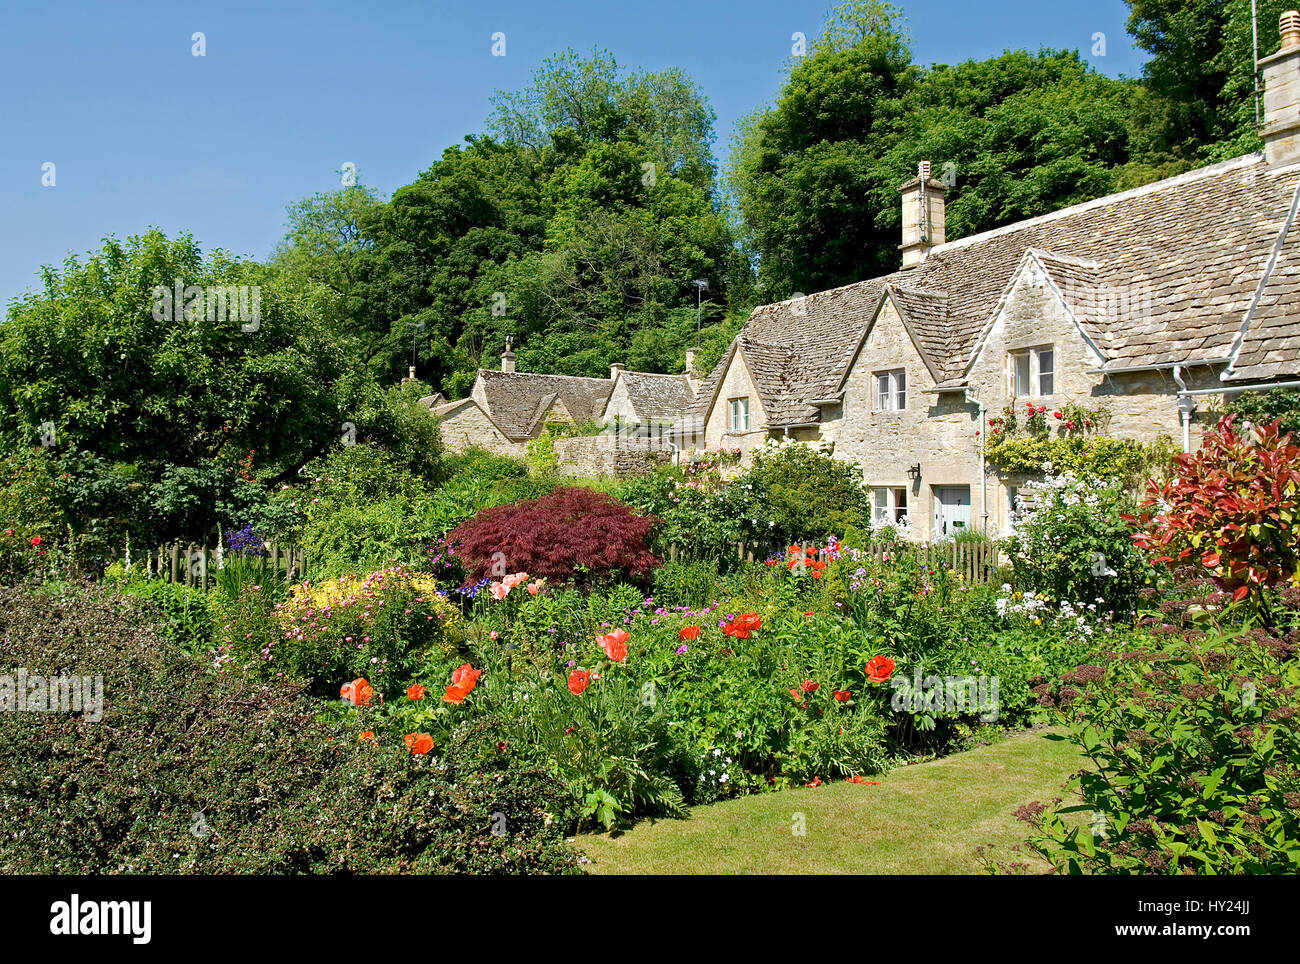 Traditional Cotswolds-Houses near Cirencester, South East England.  Traditionelle Cotswolds-HÃ¤user in der NÃ¤he von Cirencester, SÃ¼dostengland. Stock Photo